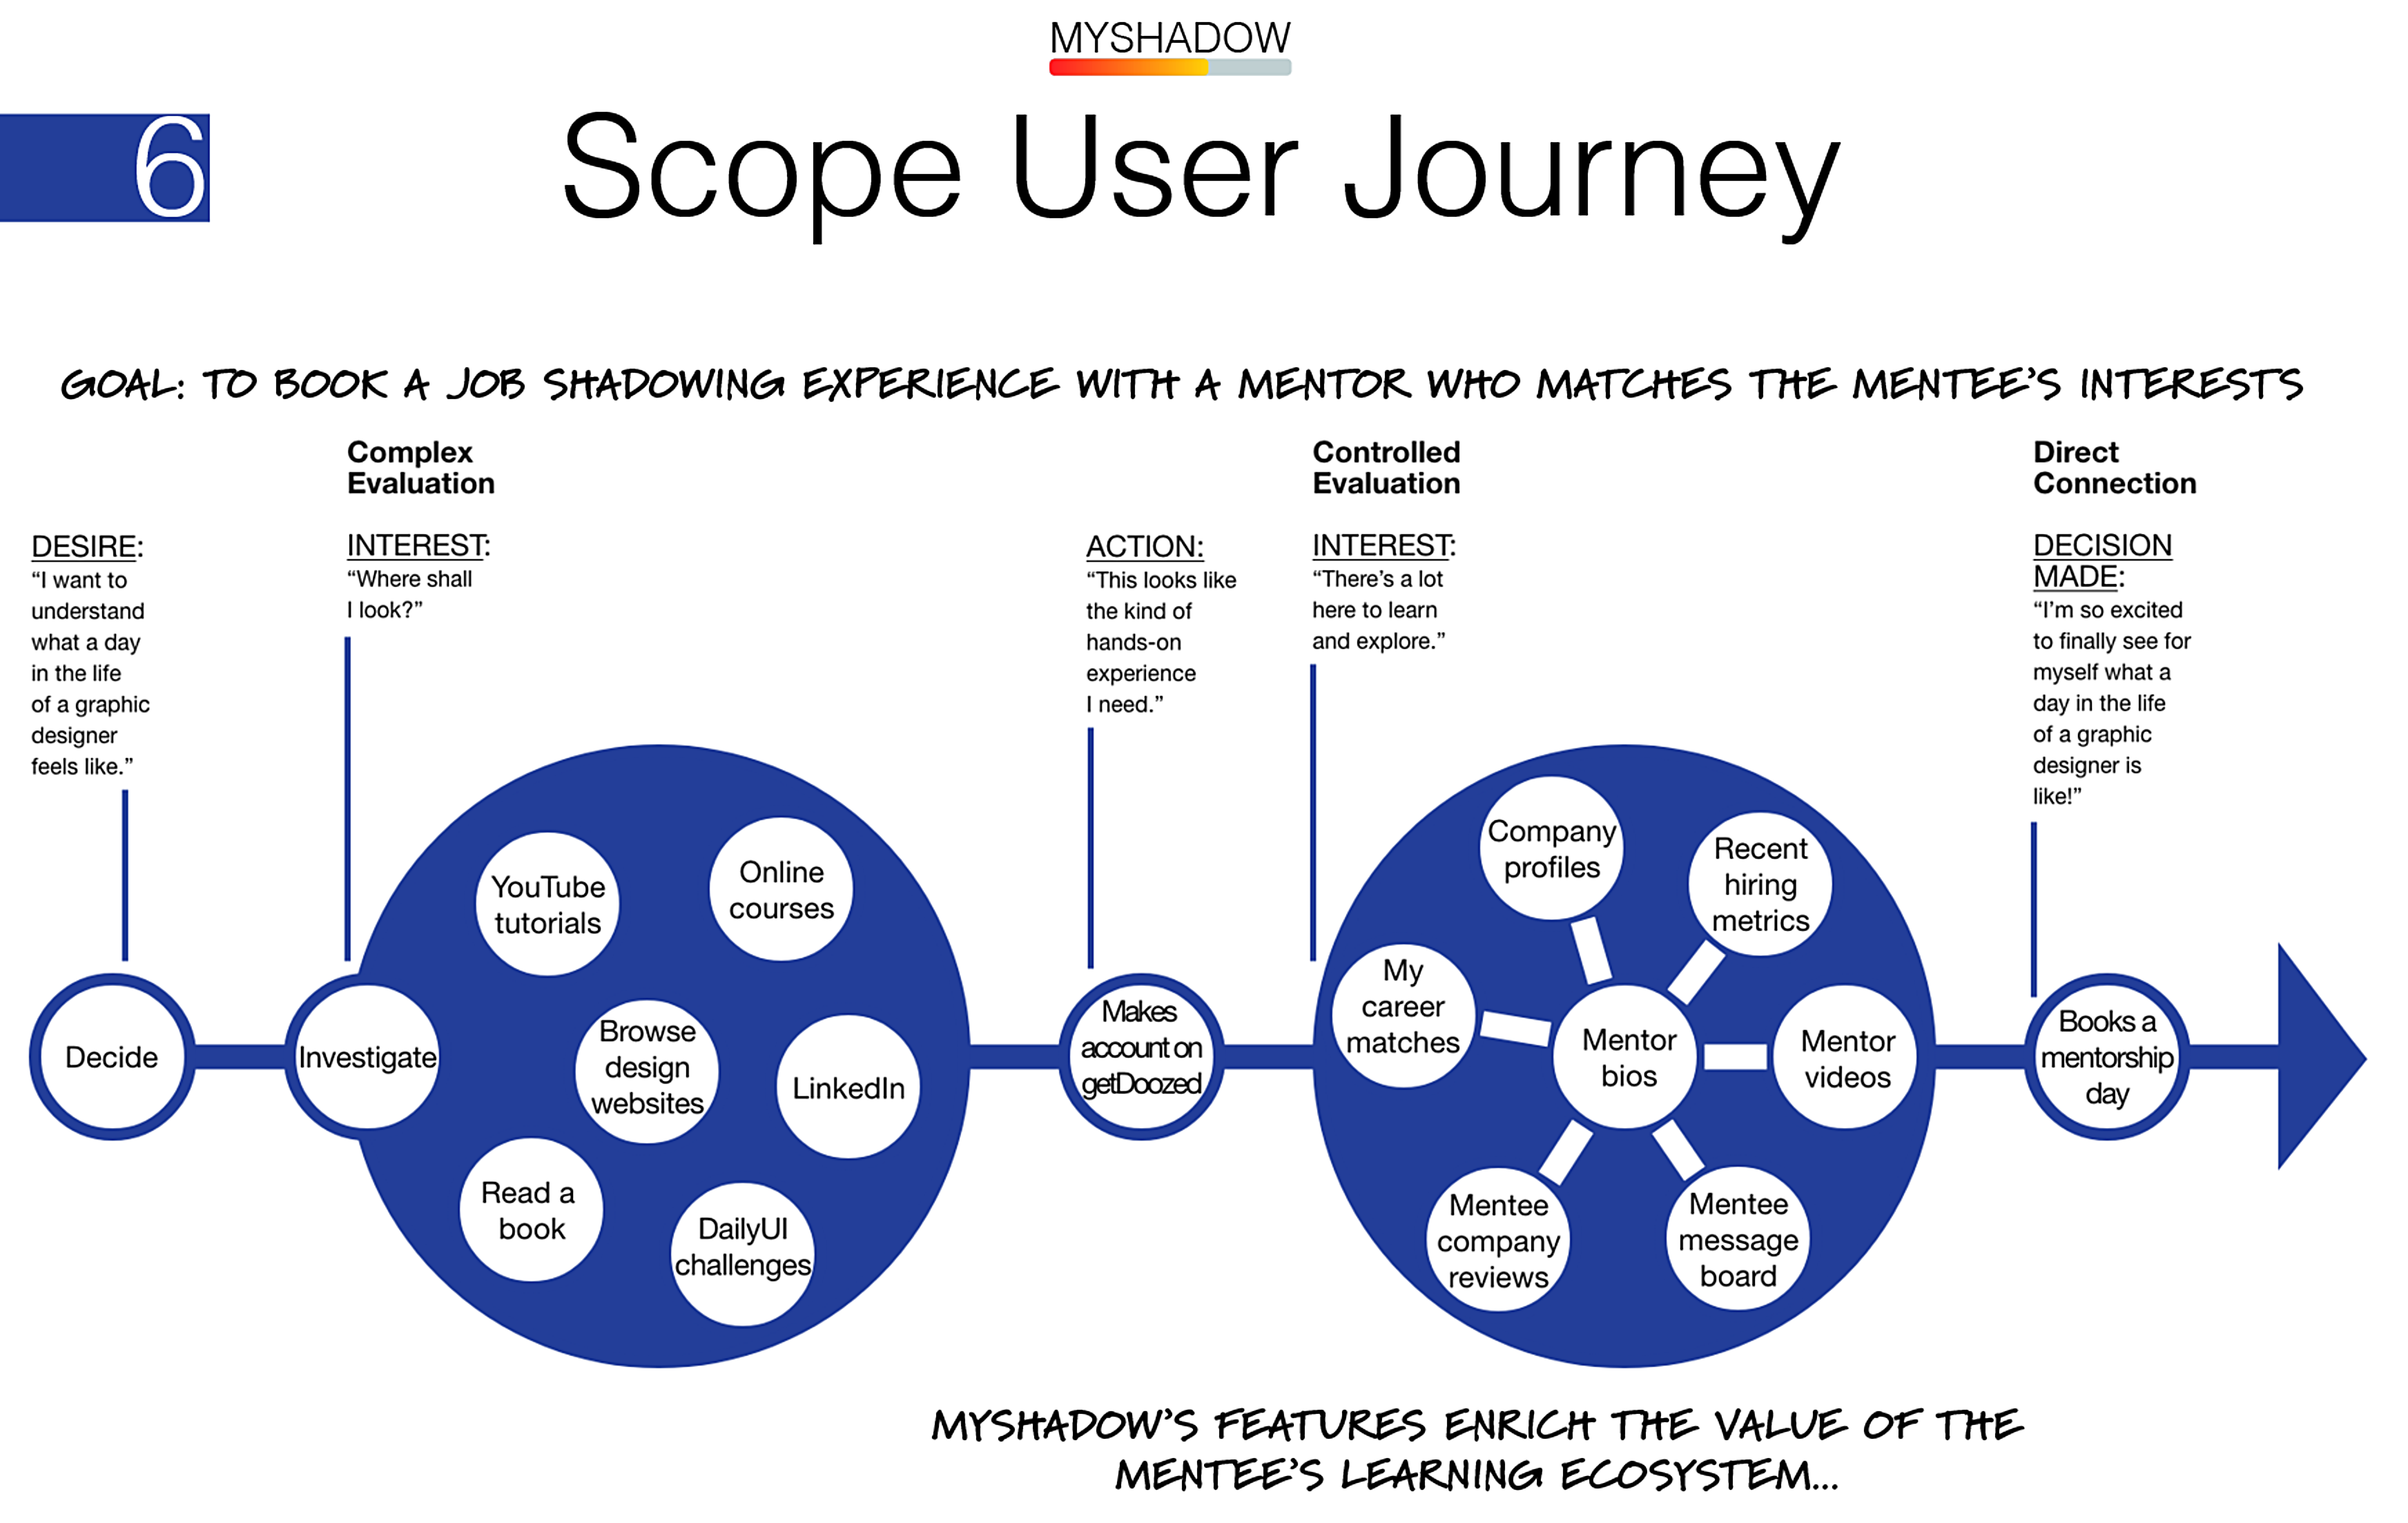 building user journeys to help the team define the ecosystem for how users make choices and fulfill their needs through our product